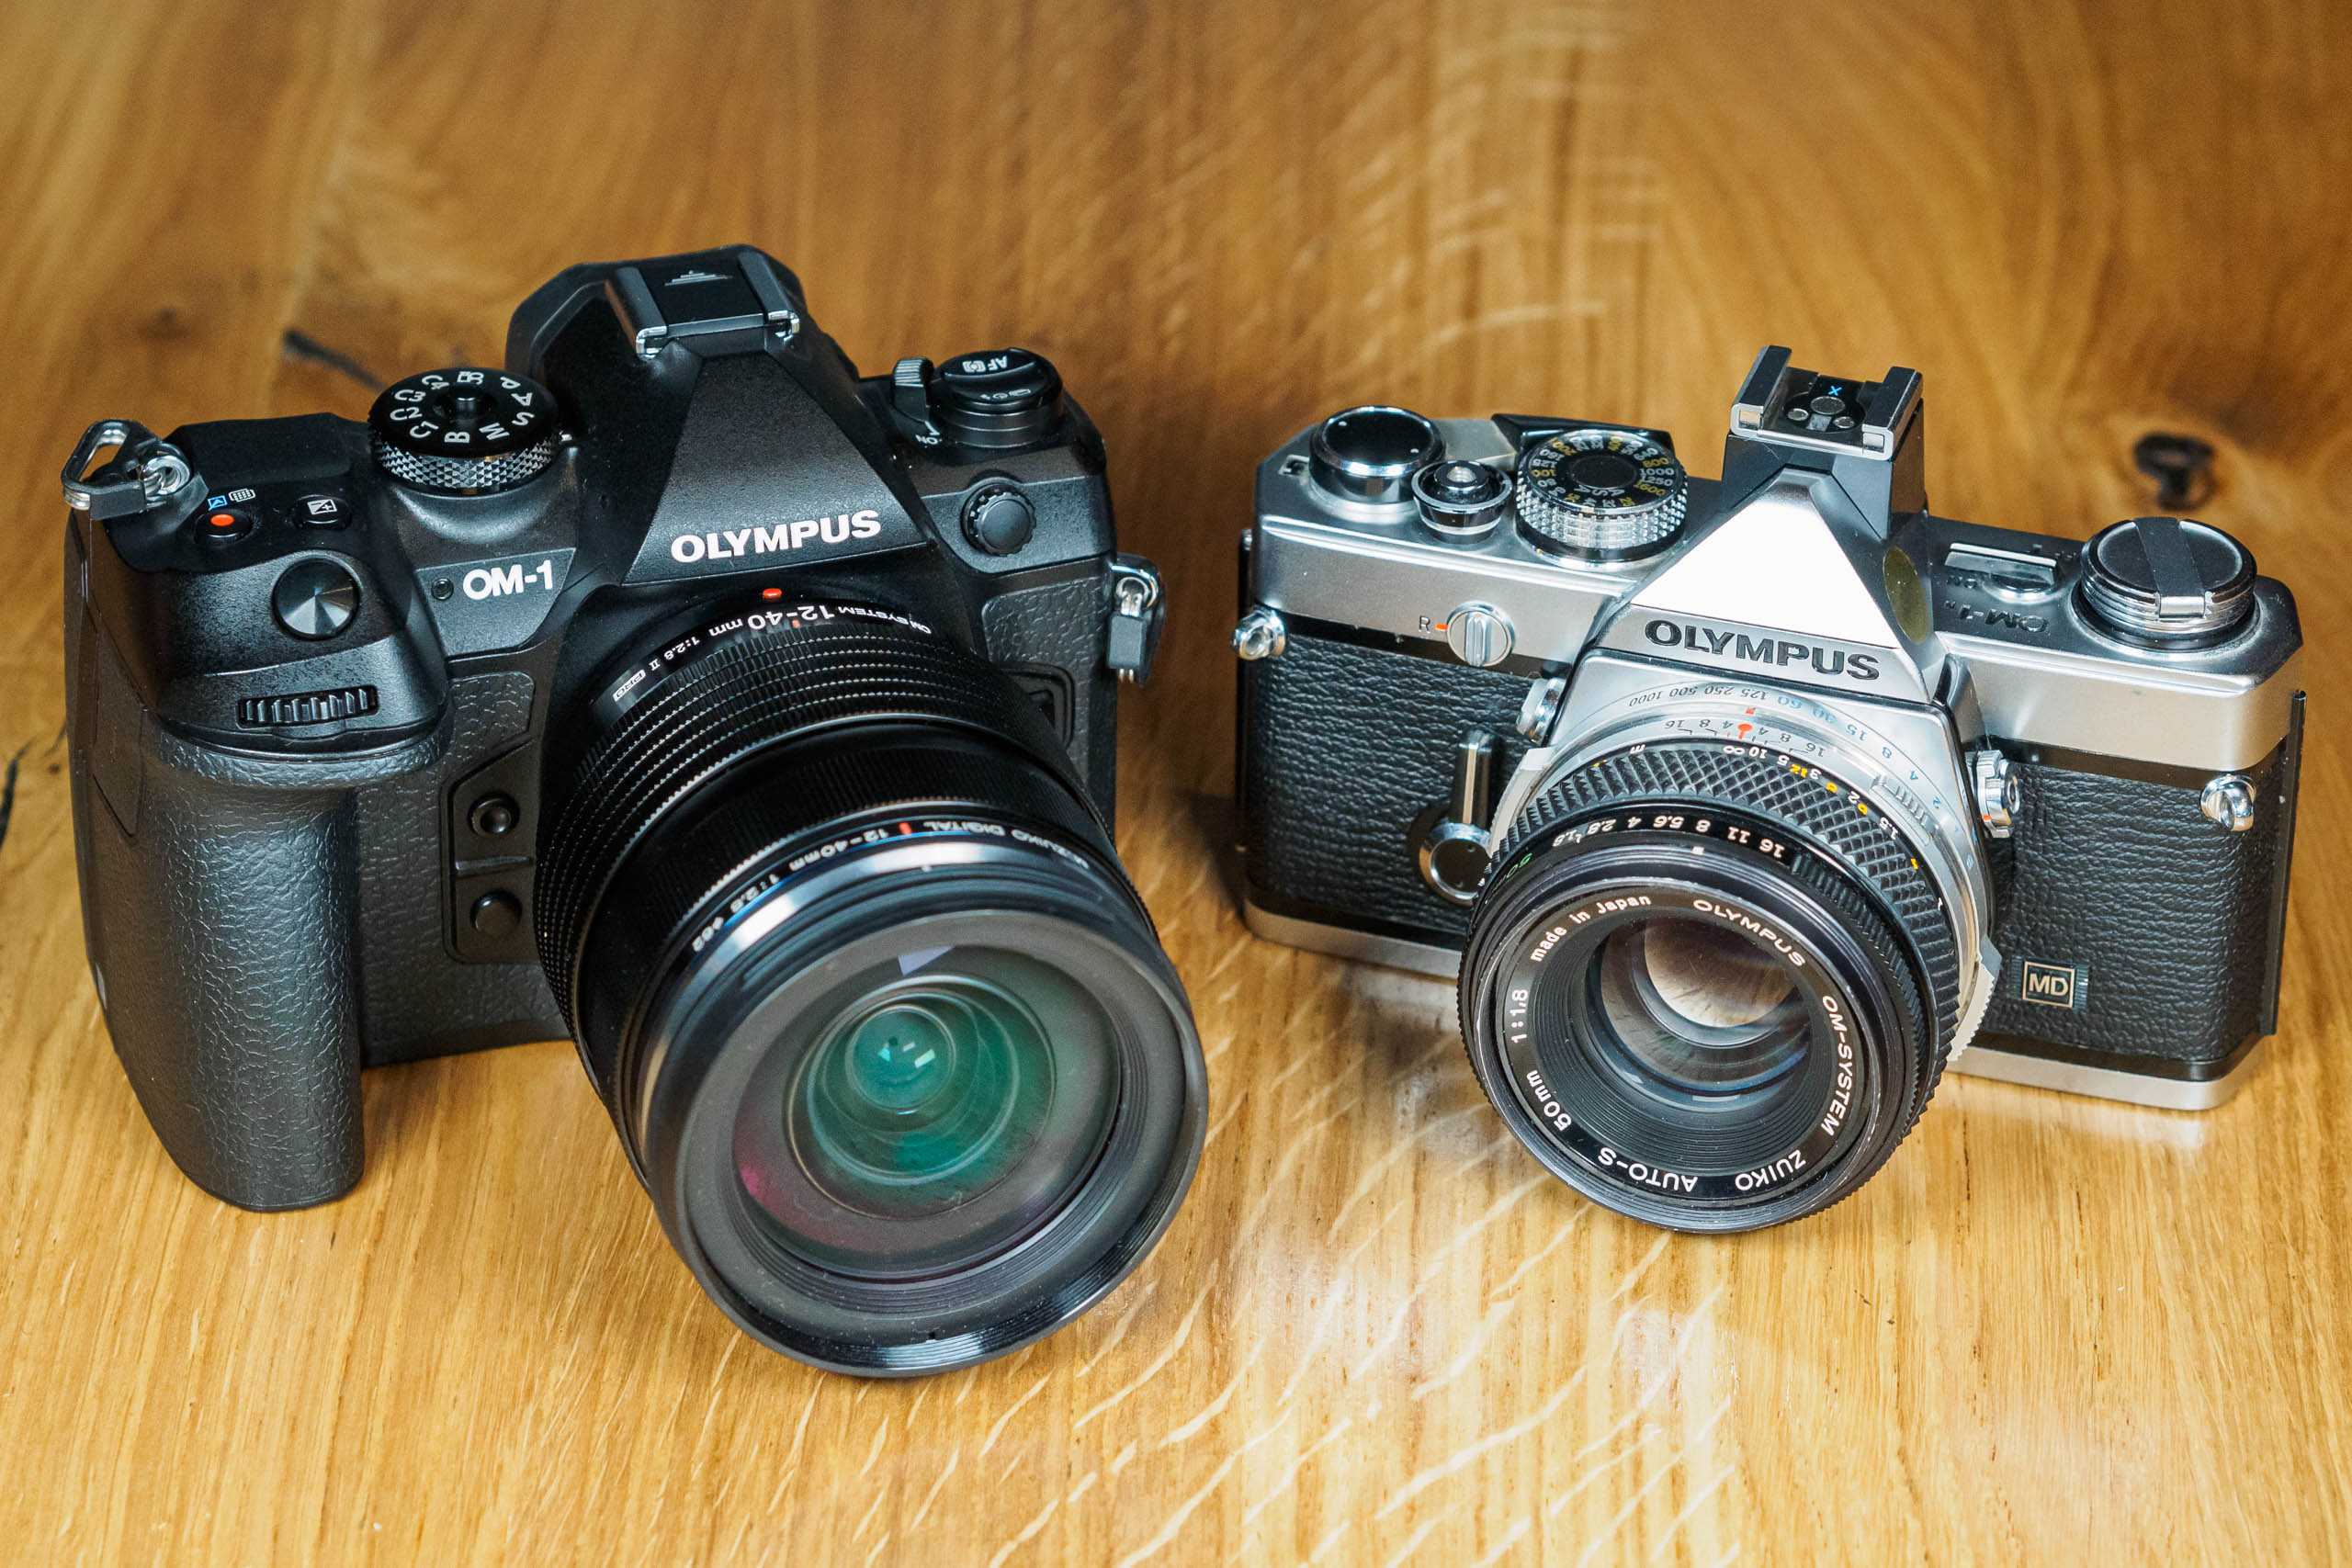 OM System Olympus OM-1 review - Amateur Photographer